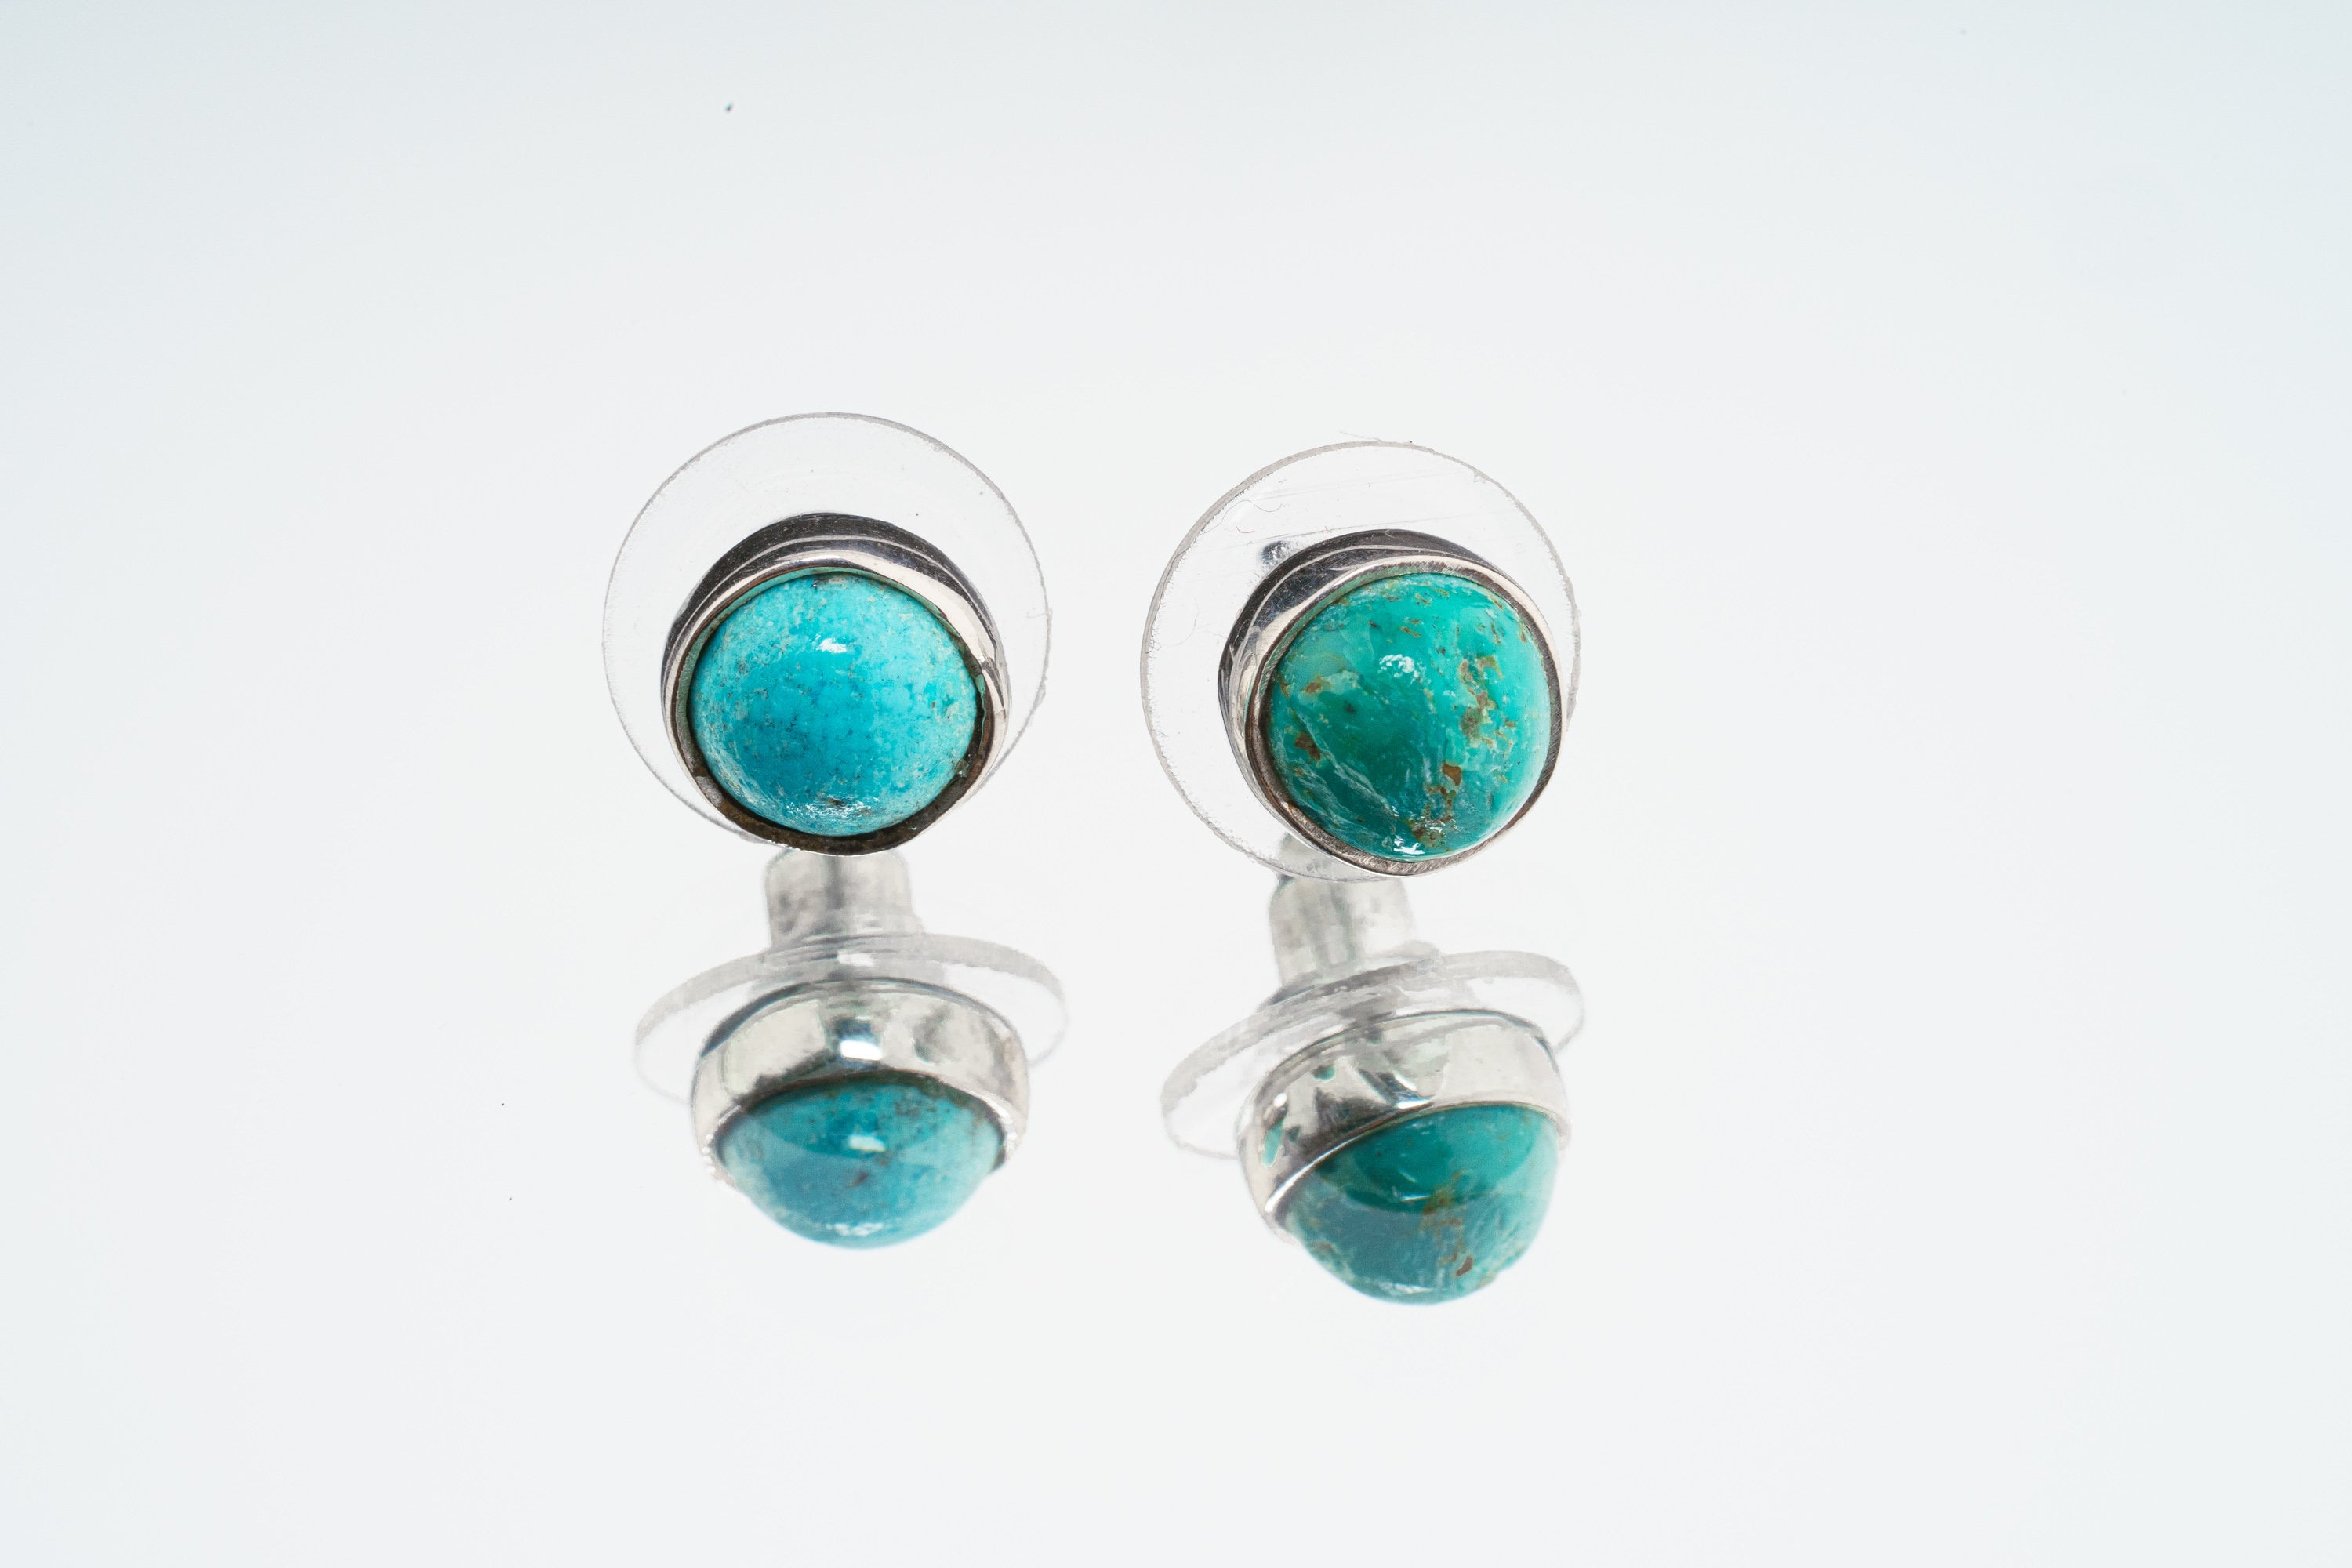 Turquoise - High Grade Old Cut American Sleeping Beauty Pair- Sterling Silver - High Shine - Freeform Earring Studs